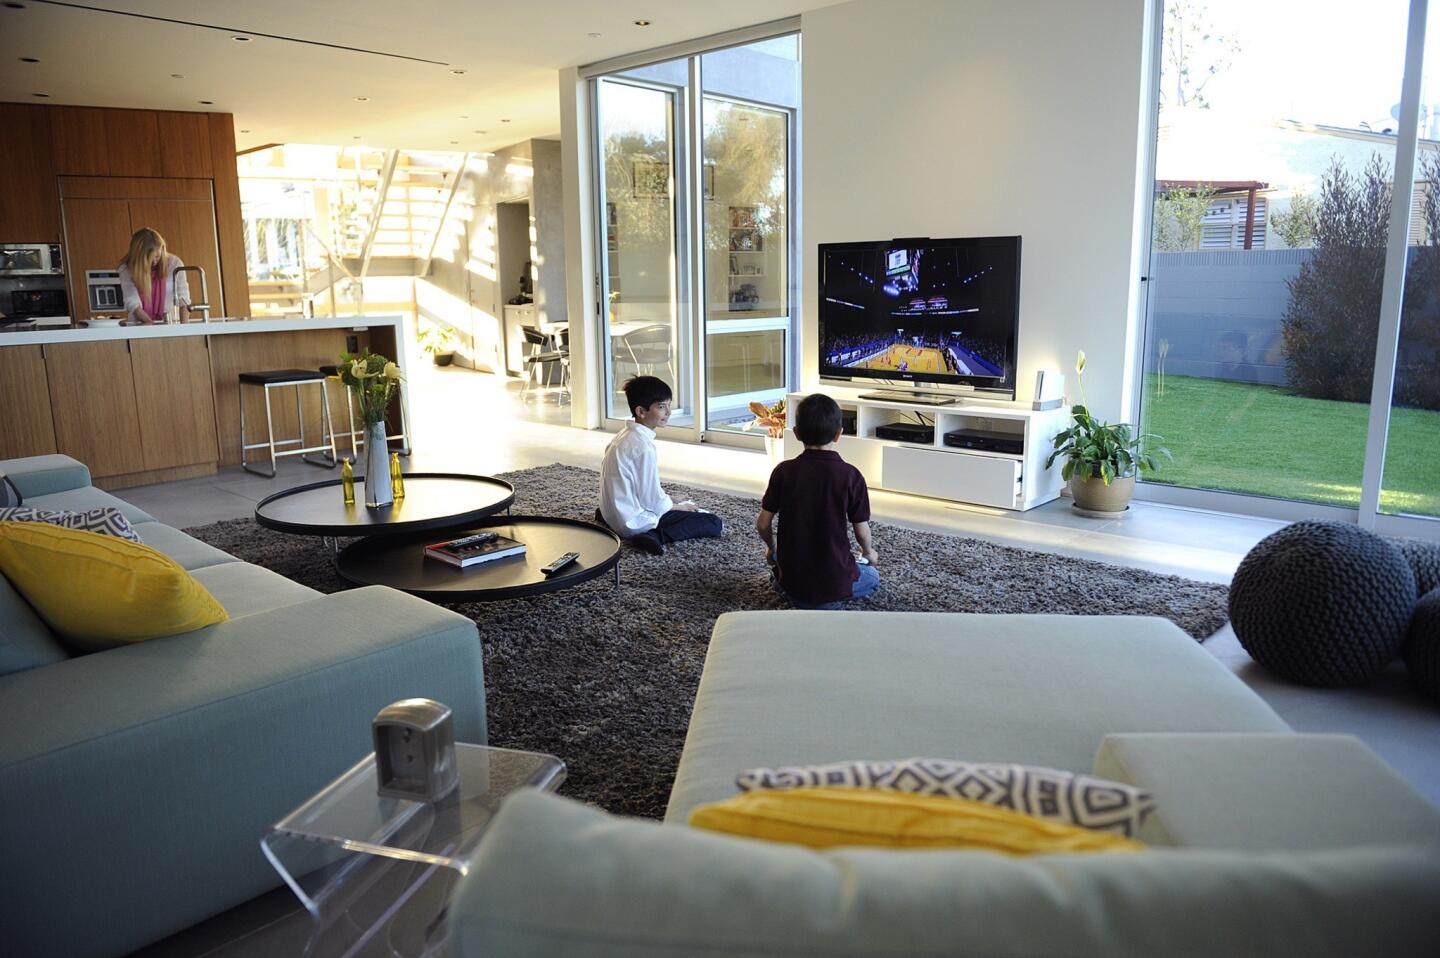 Tanner and Kyle Chen play a video game while their mom, Tiffany, makes dinner. The kitchen sink is the command and control center, with sightlines to wherever the kids are playing — family room or backyard.